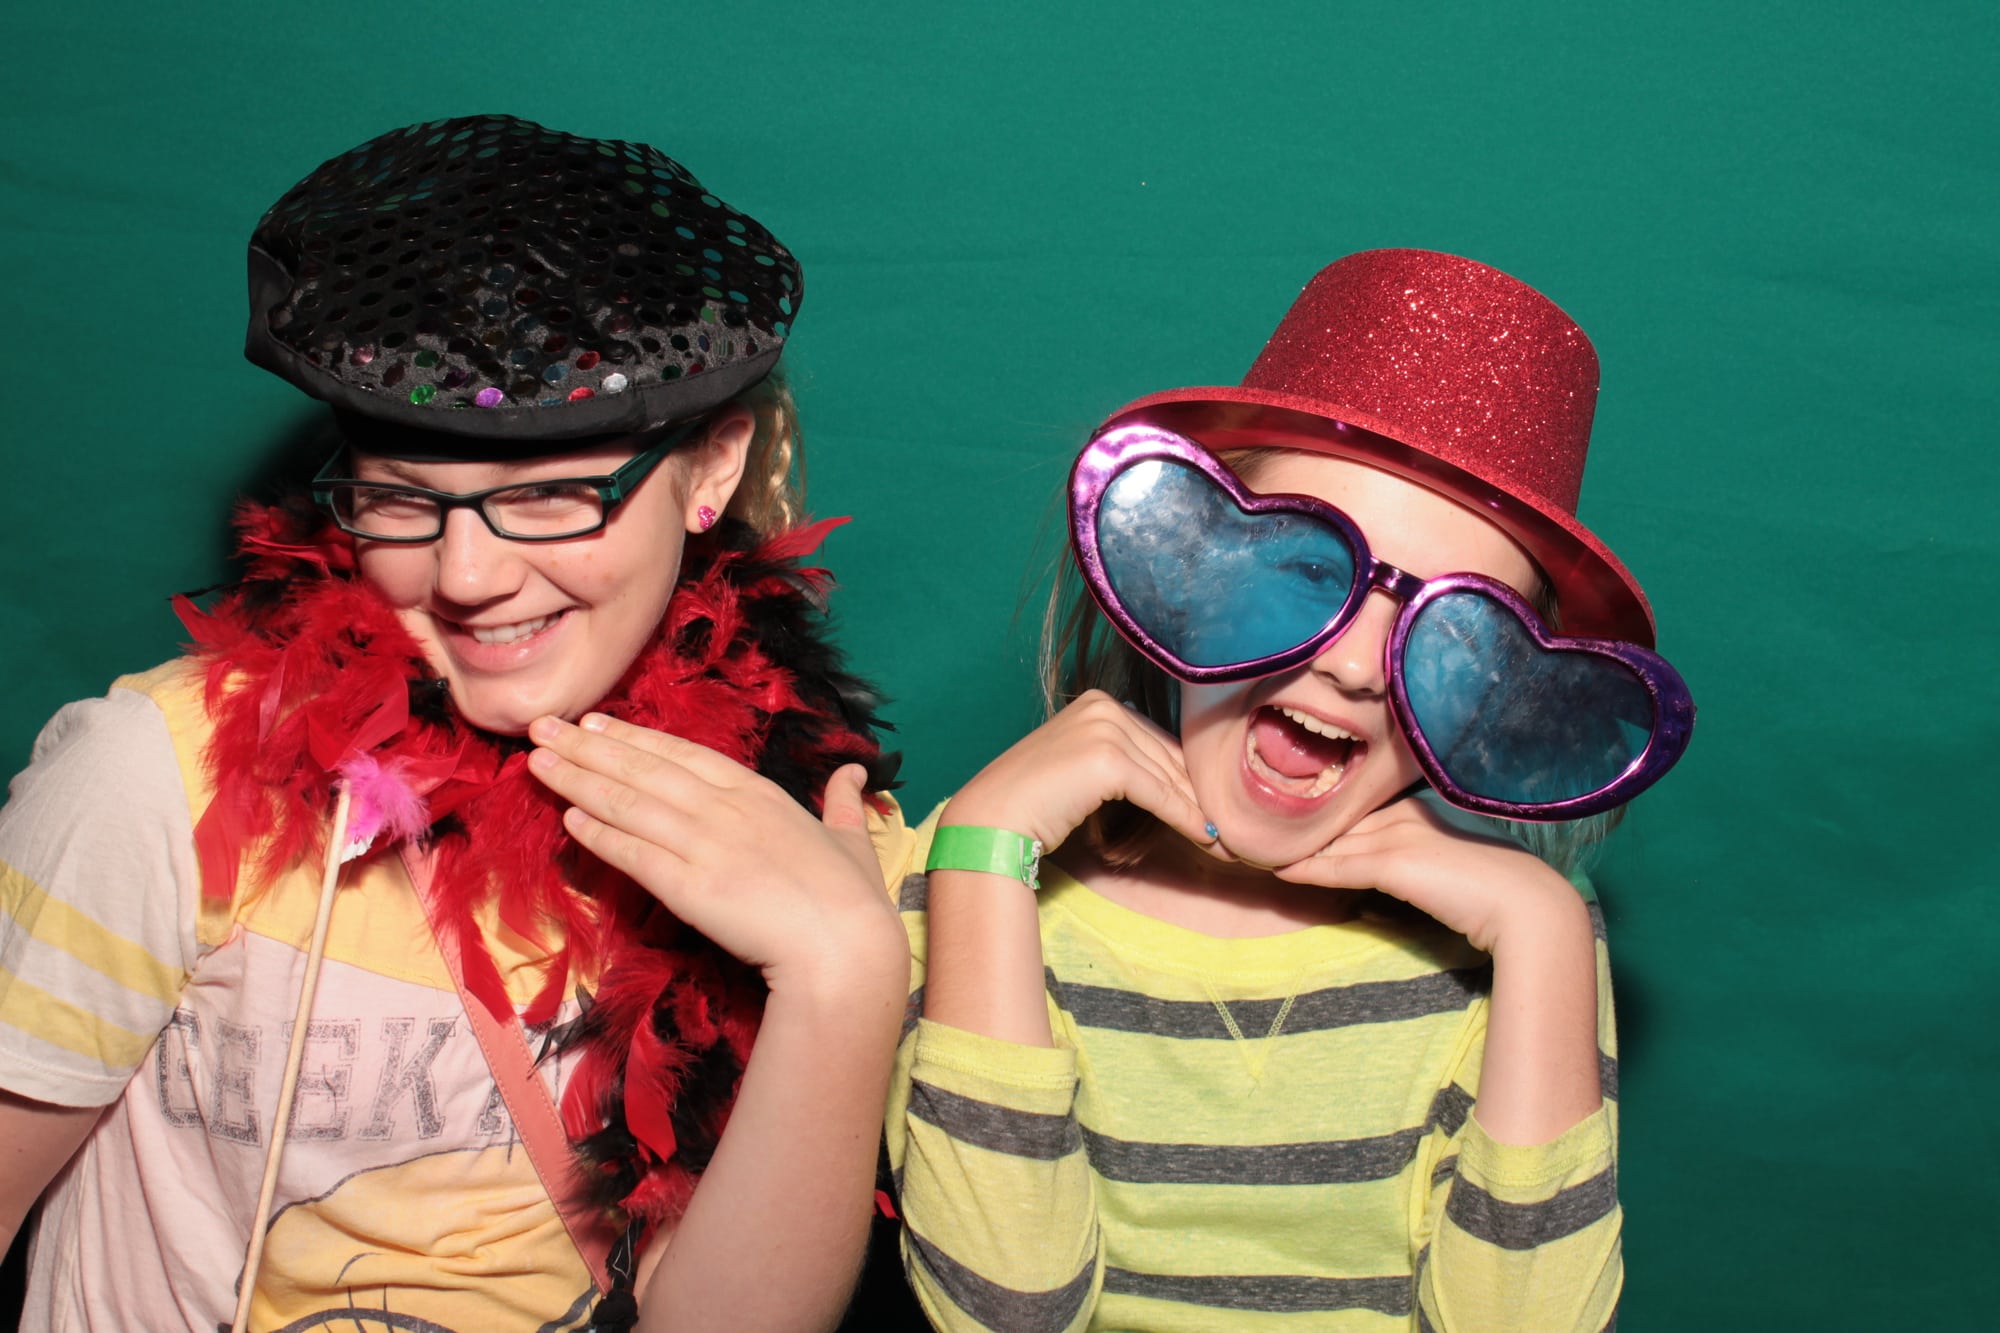 Photo Booth Rental-School-Carnival-PTA-Steiner Ranch-Lakeway-Colorful-No. 1-Fun-Props-Children